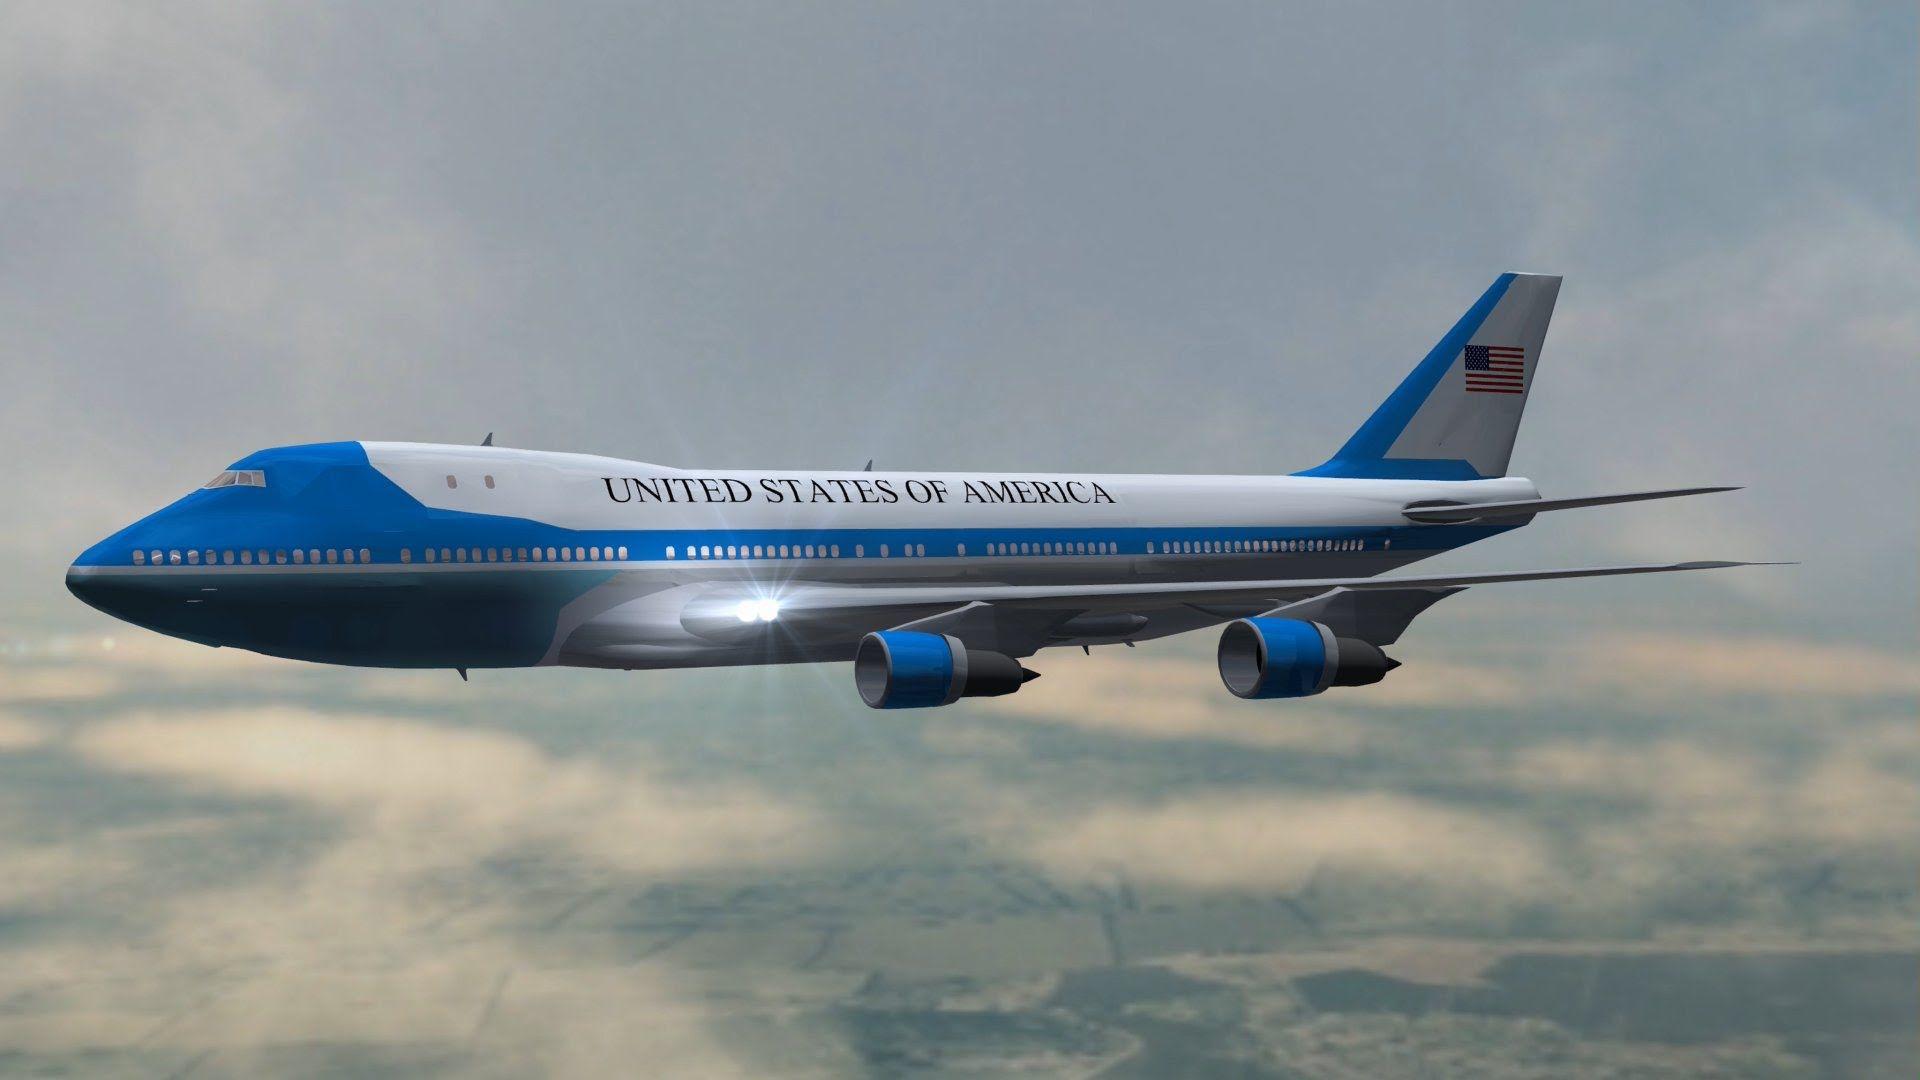 Air Force One President Airplane Boing in fly up